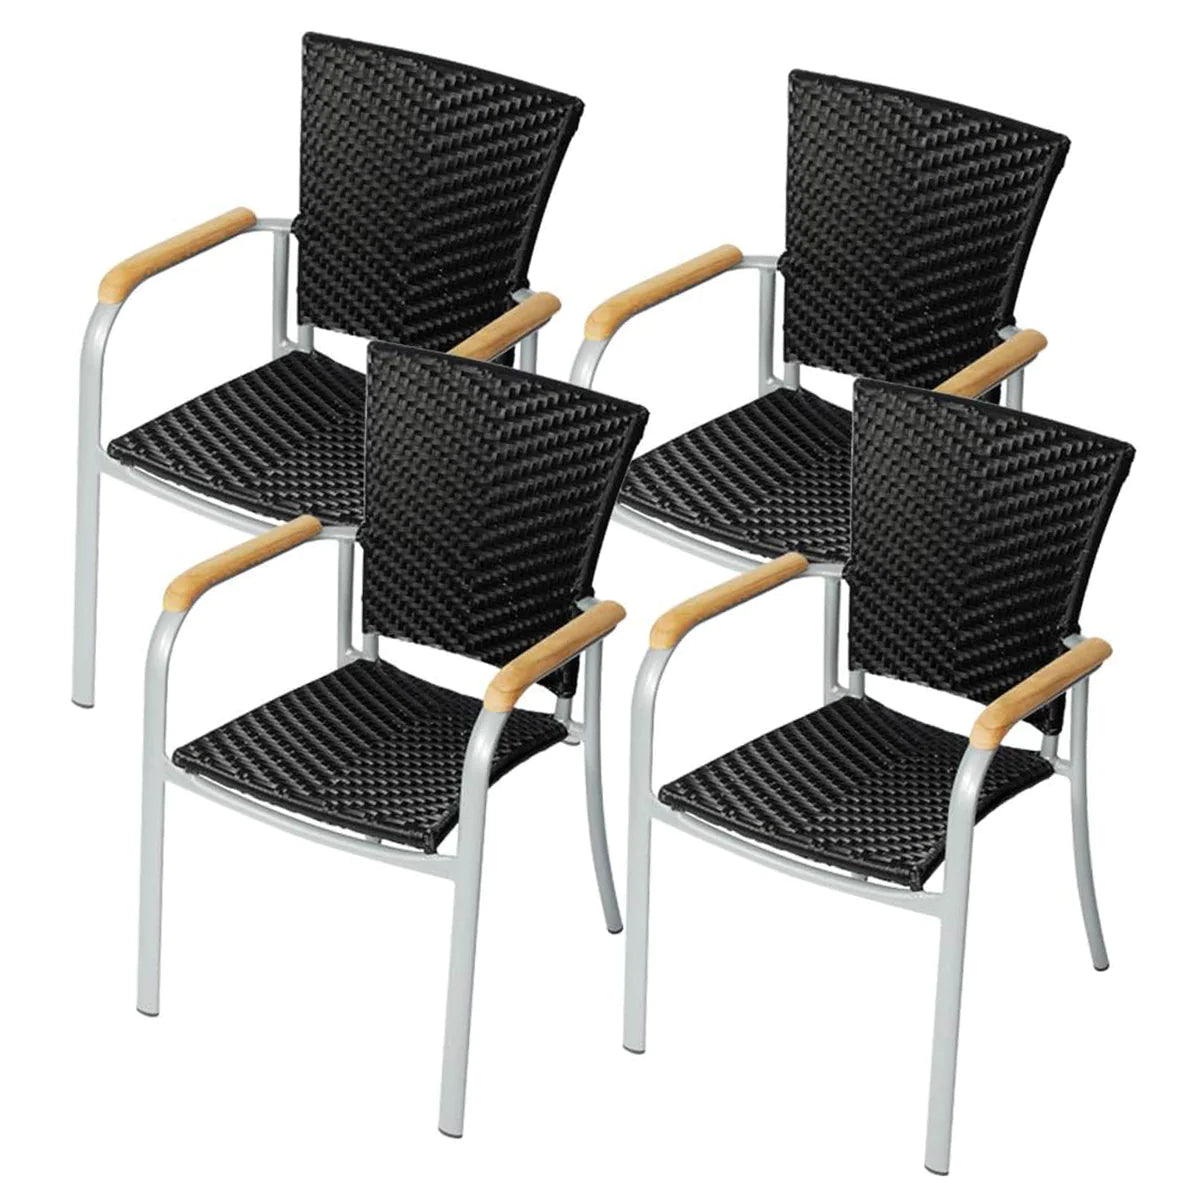 4 Sets of Outdoor Rattan Woven Chairs,Black